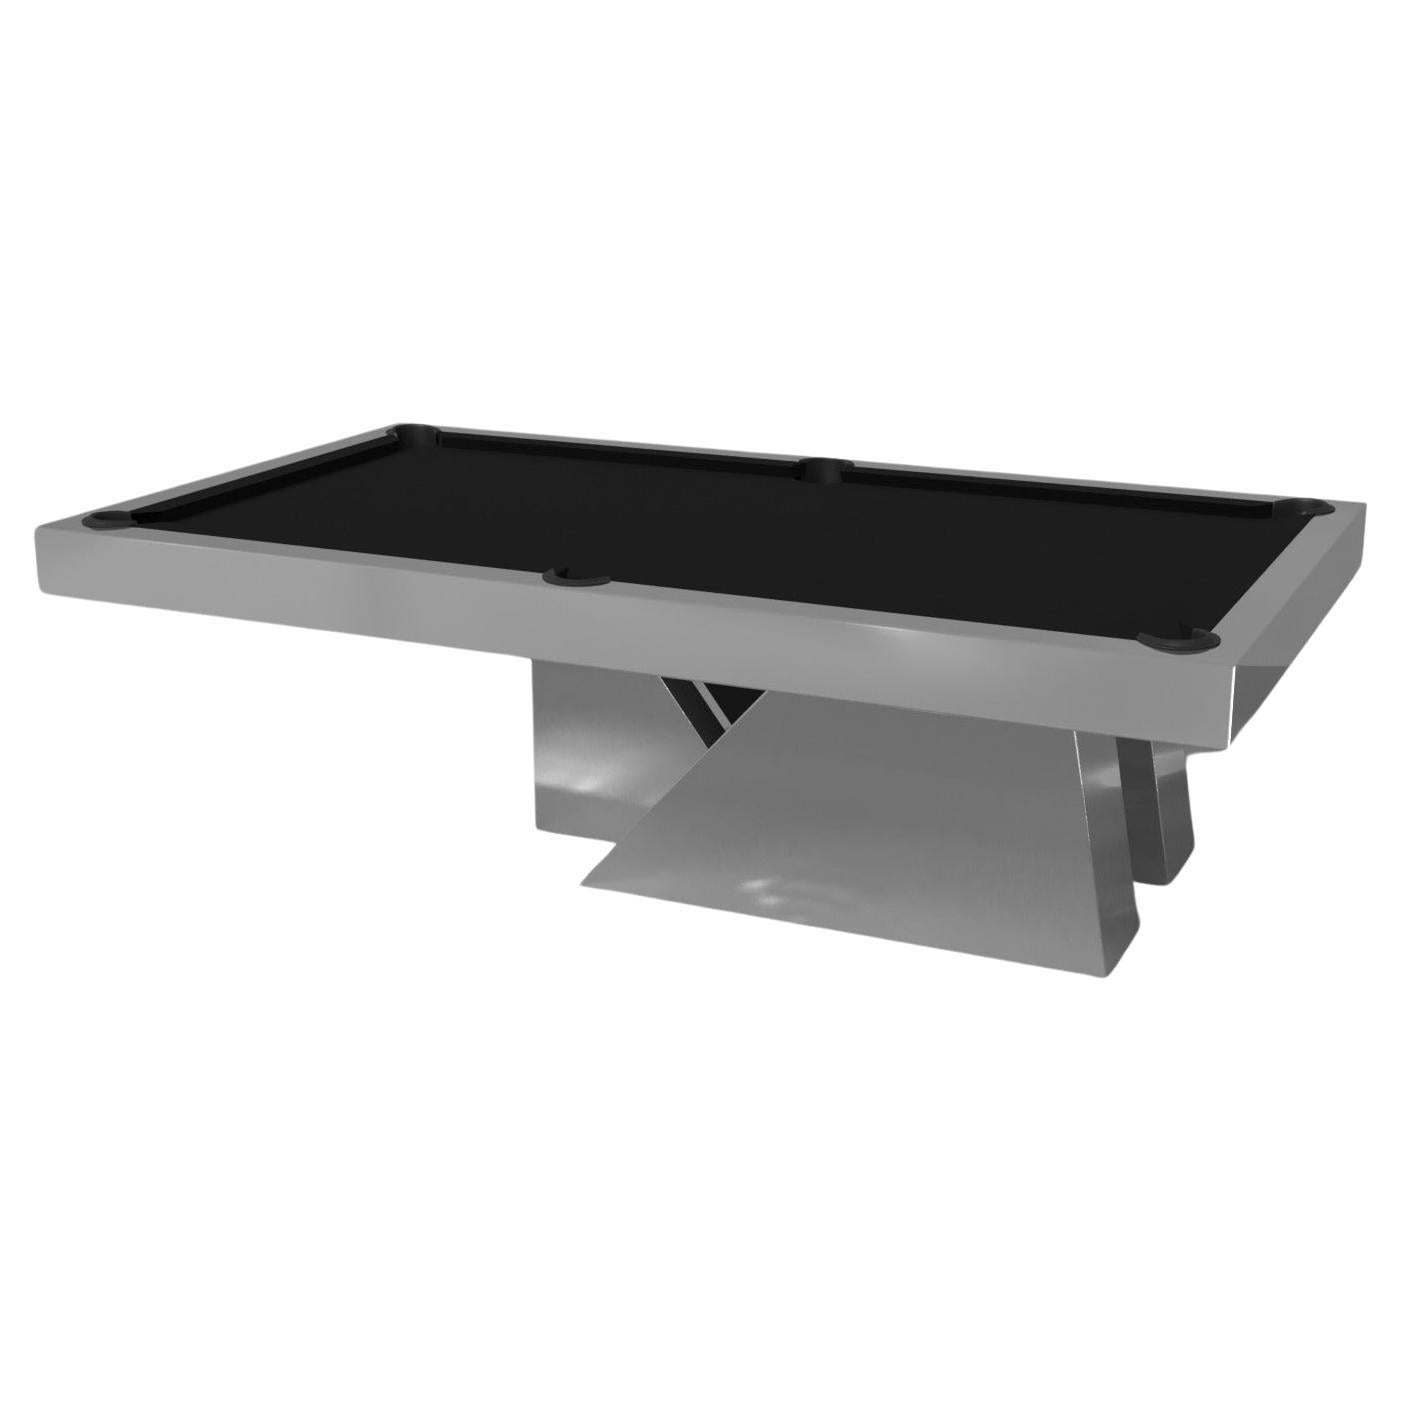 Elevate Customs Stilt Pool Table / Stainless Steel Metal in 7'/8' - Made in USA For Sale